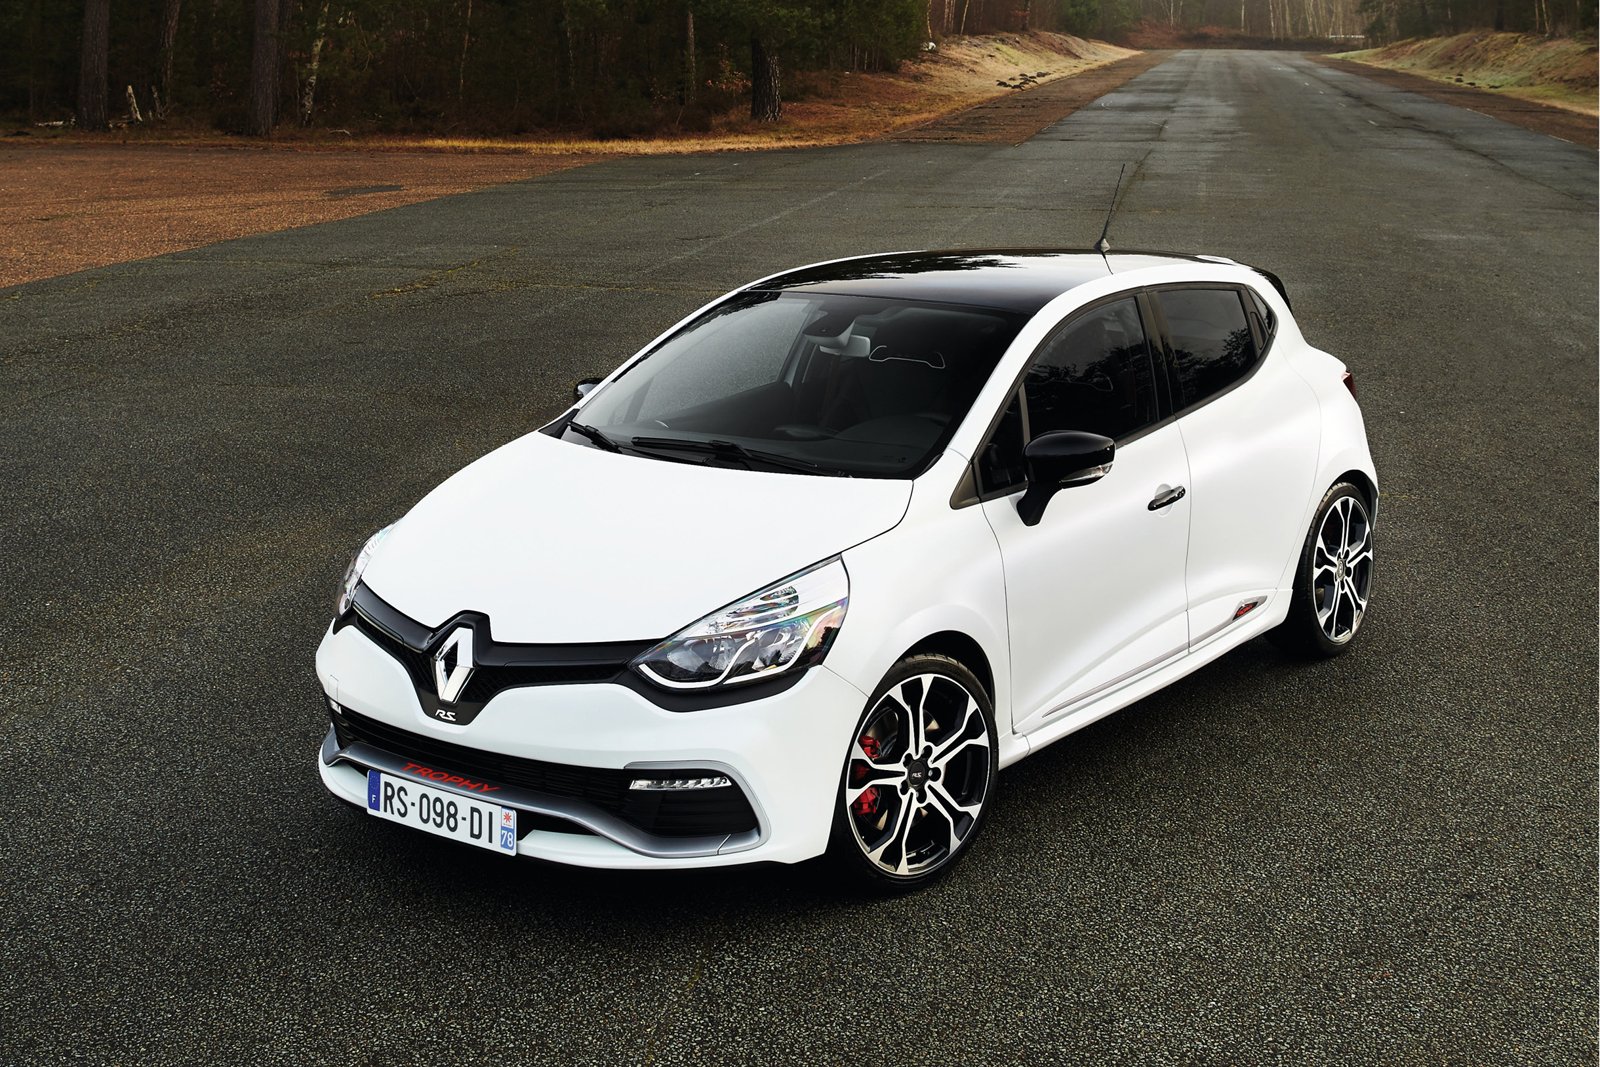 renault, Clio, Rs 220, Trophy, Edc, 2015, Cars Wallpaper